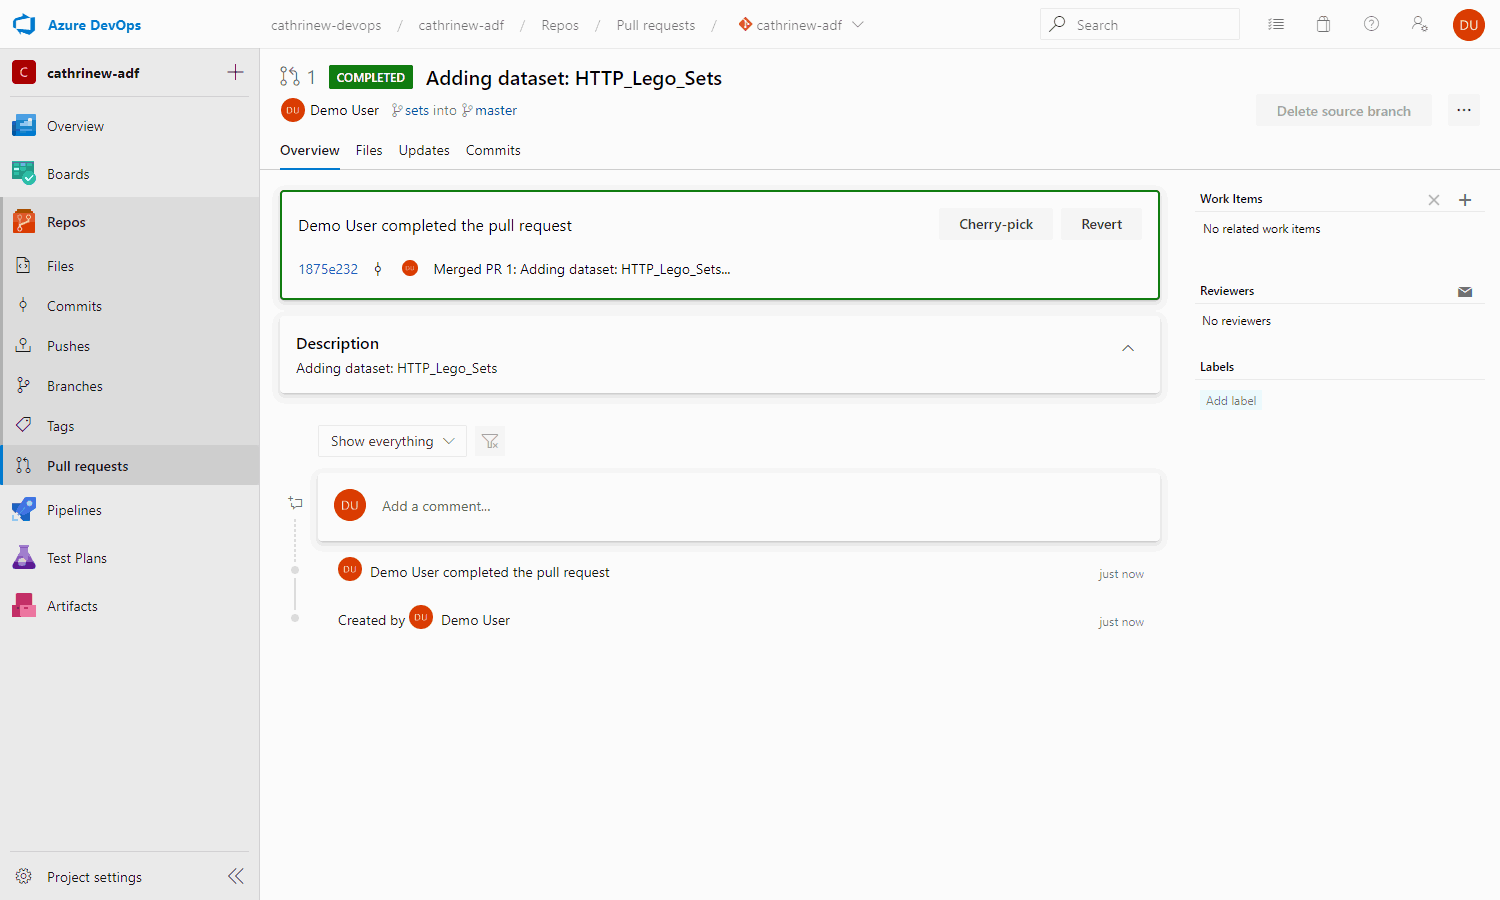 Screenshot of a completed pull request in Azure DevOps